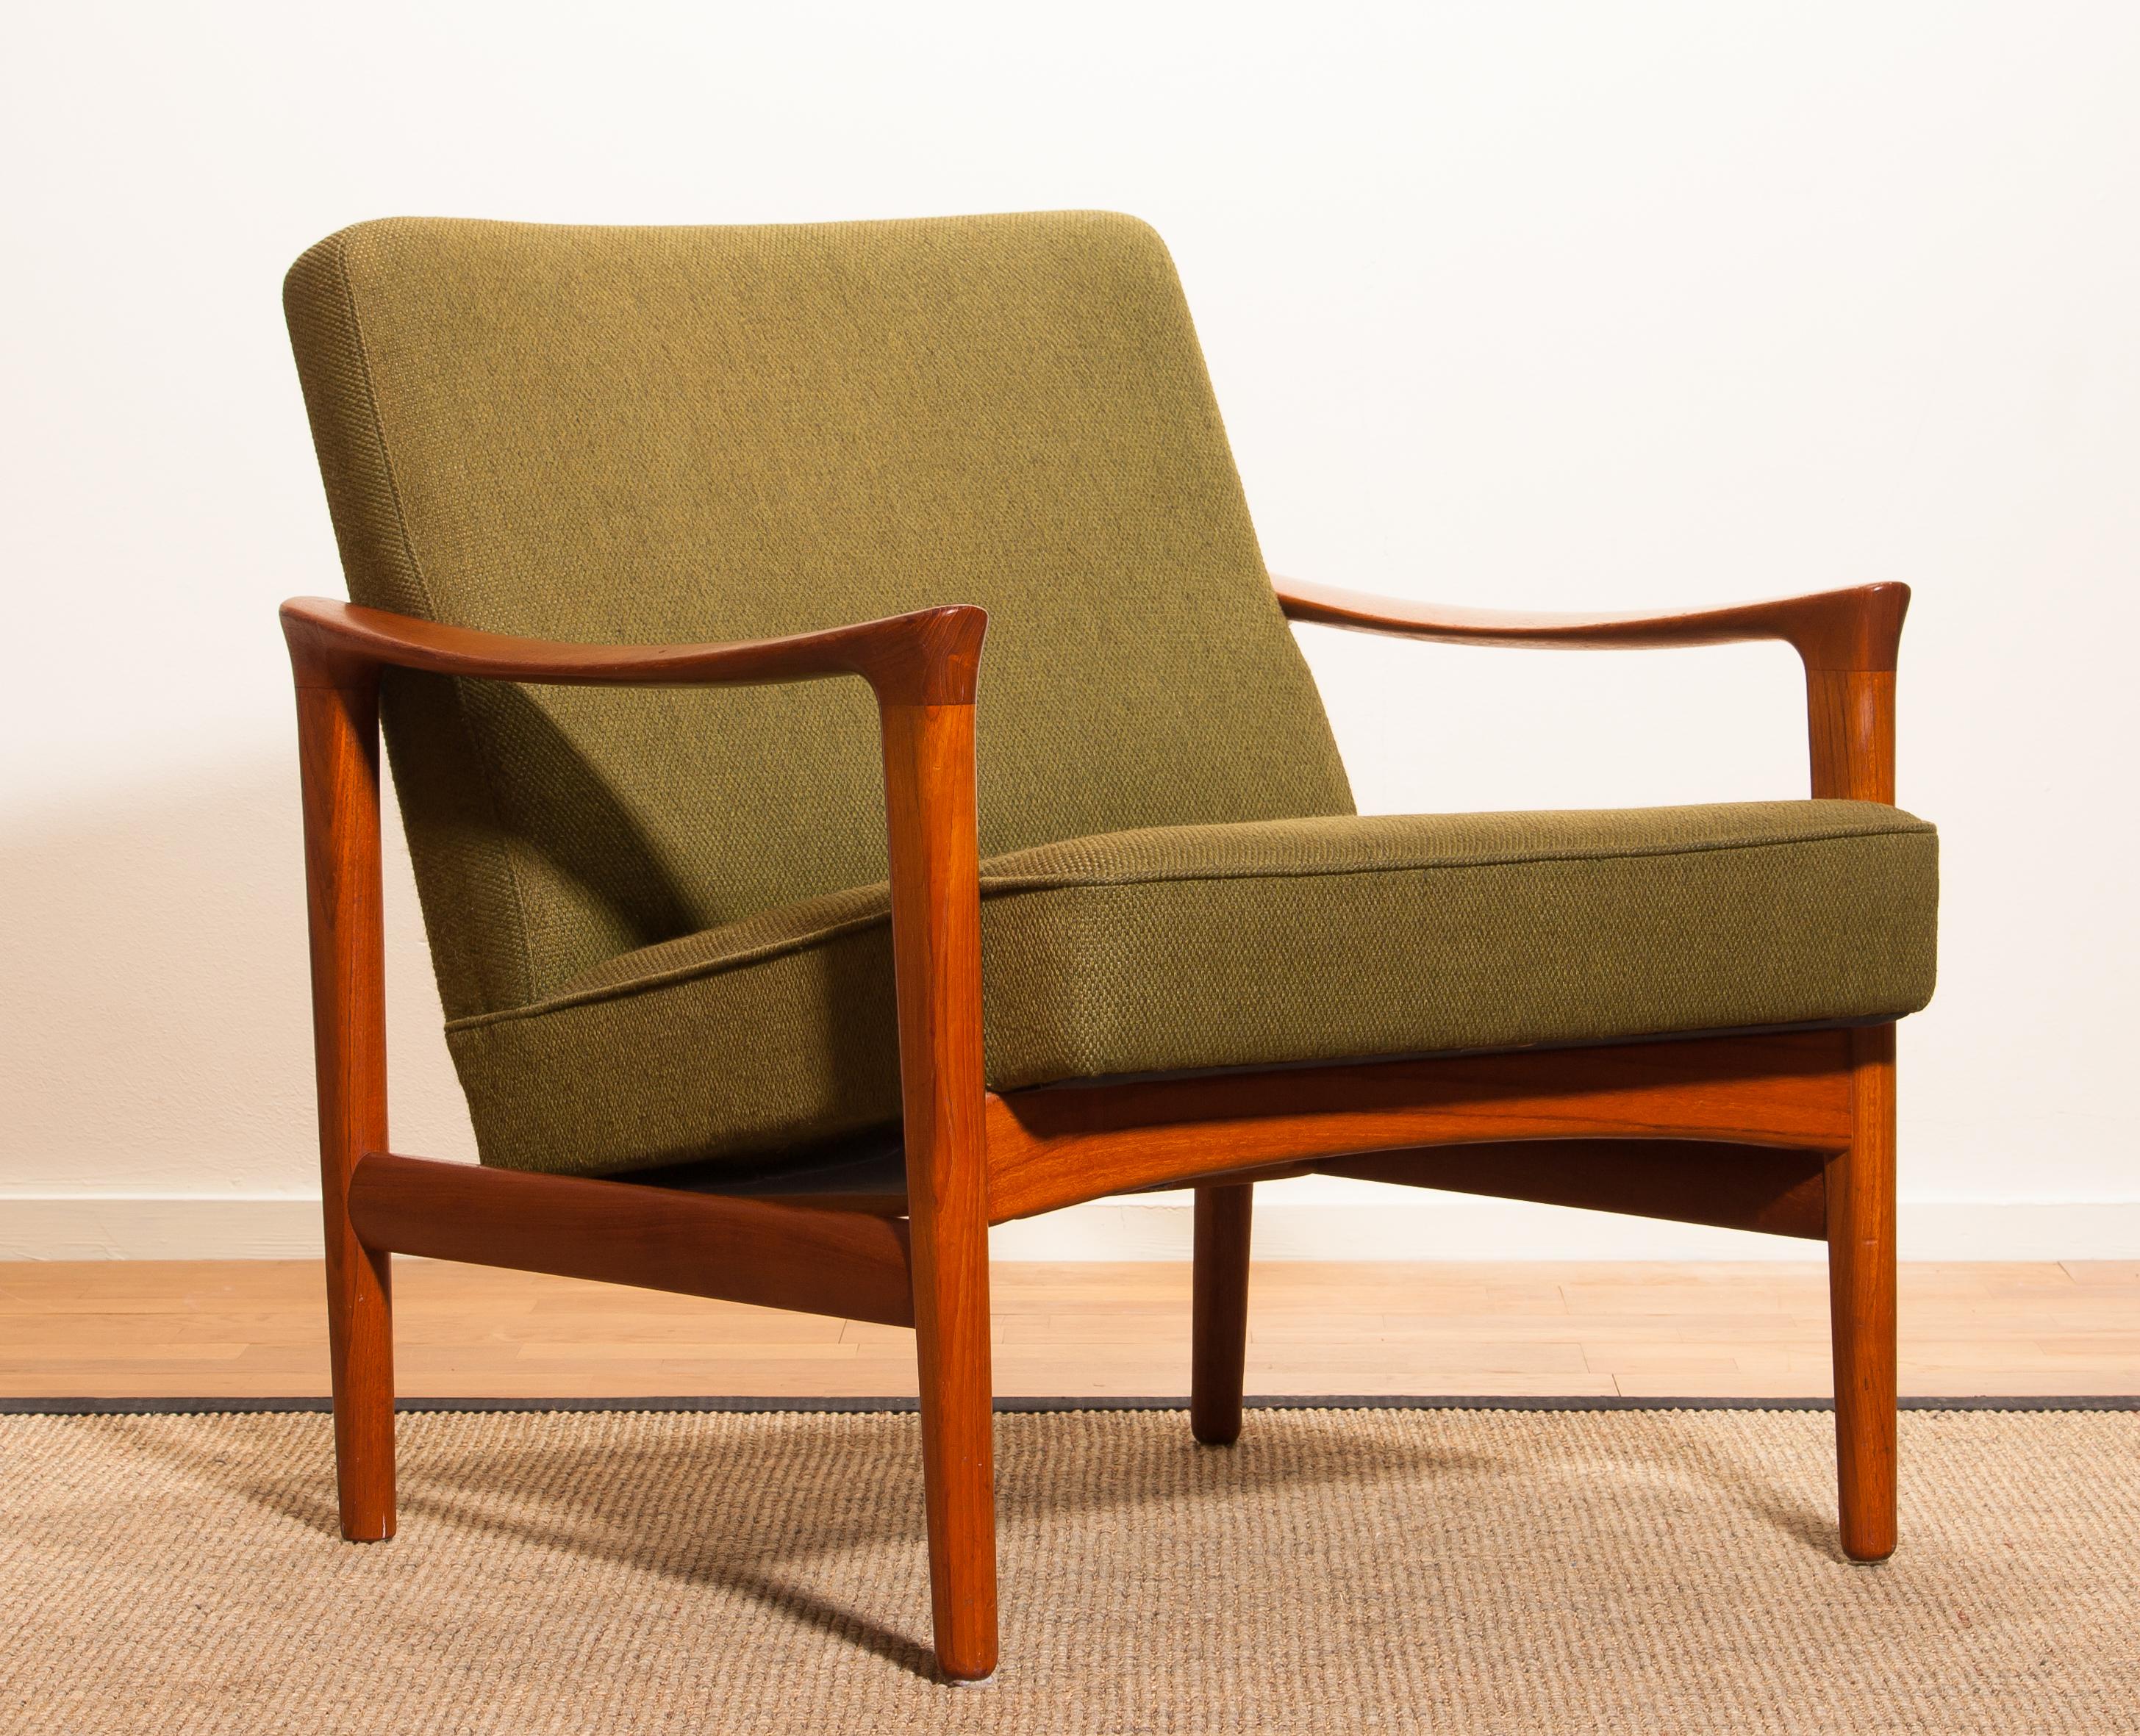 A beautiful lounge chair designed by Erik Wørts and produced by Bröderna Andersson, Sweden.
This chair is made of teak with a green fabric upholstery.
It is in a very good condition.
Period 1960-1969.
Dimensions: H 73 cm, W 70 cm, D 70 cm, SH 42